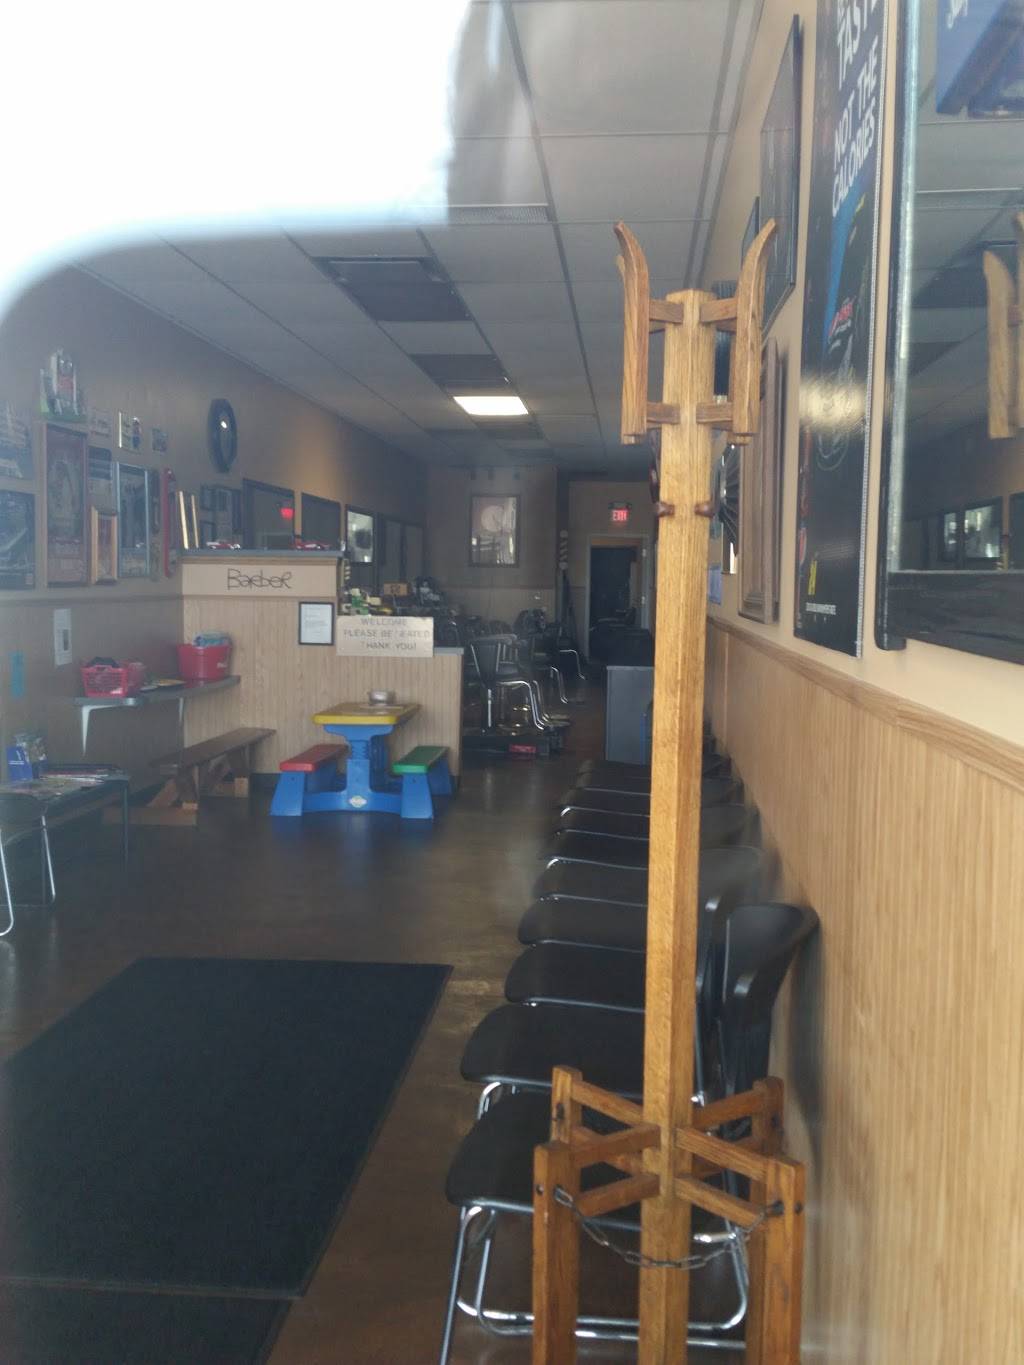 West Valley Barber Shop | 429 W Bagley Rd, Berea, OH 44017, USA | Phone: (440) 891-4247